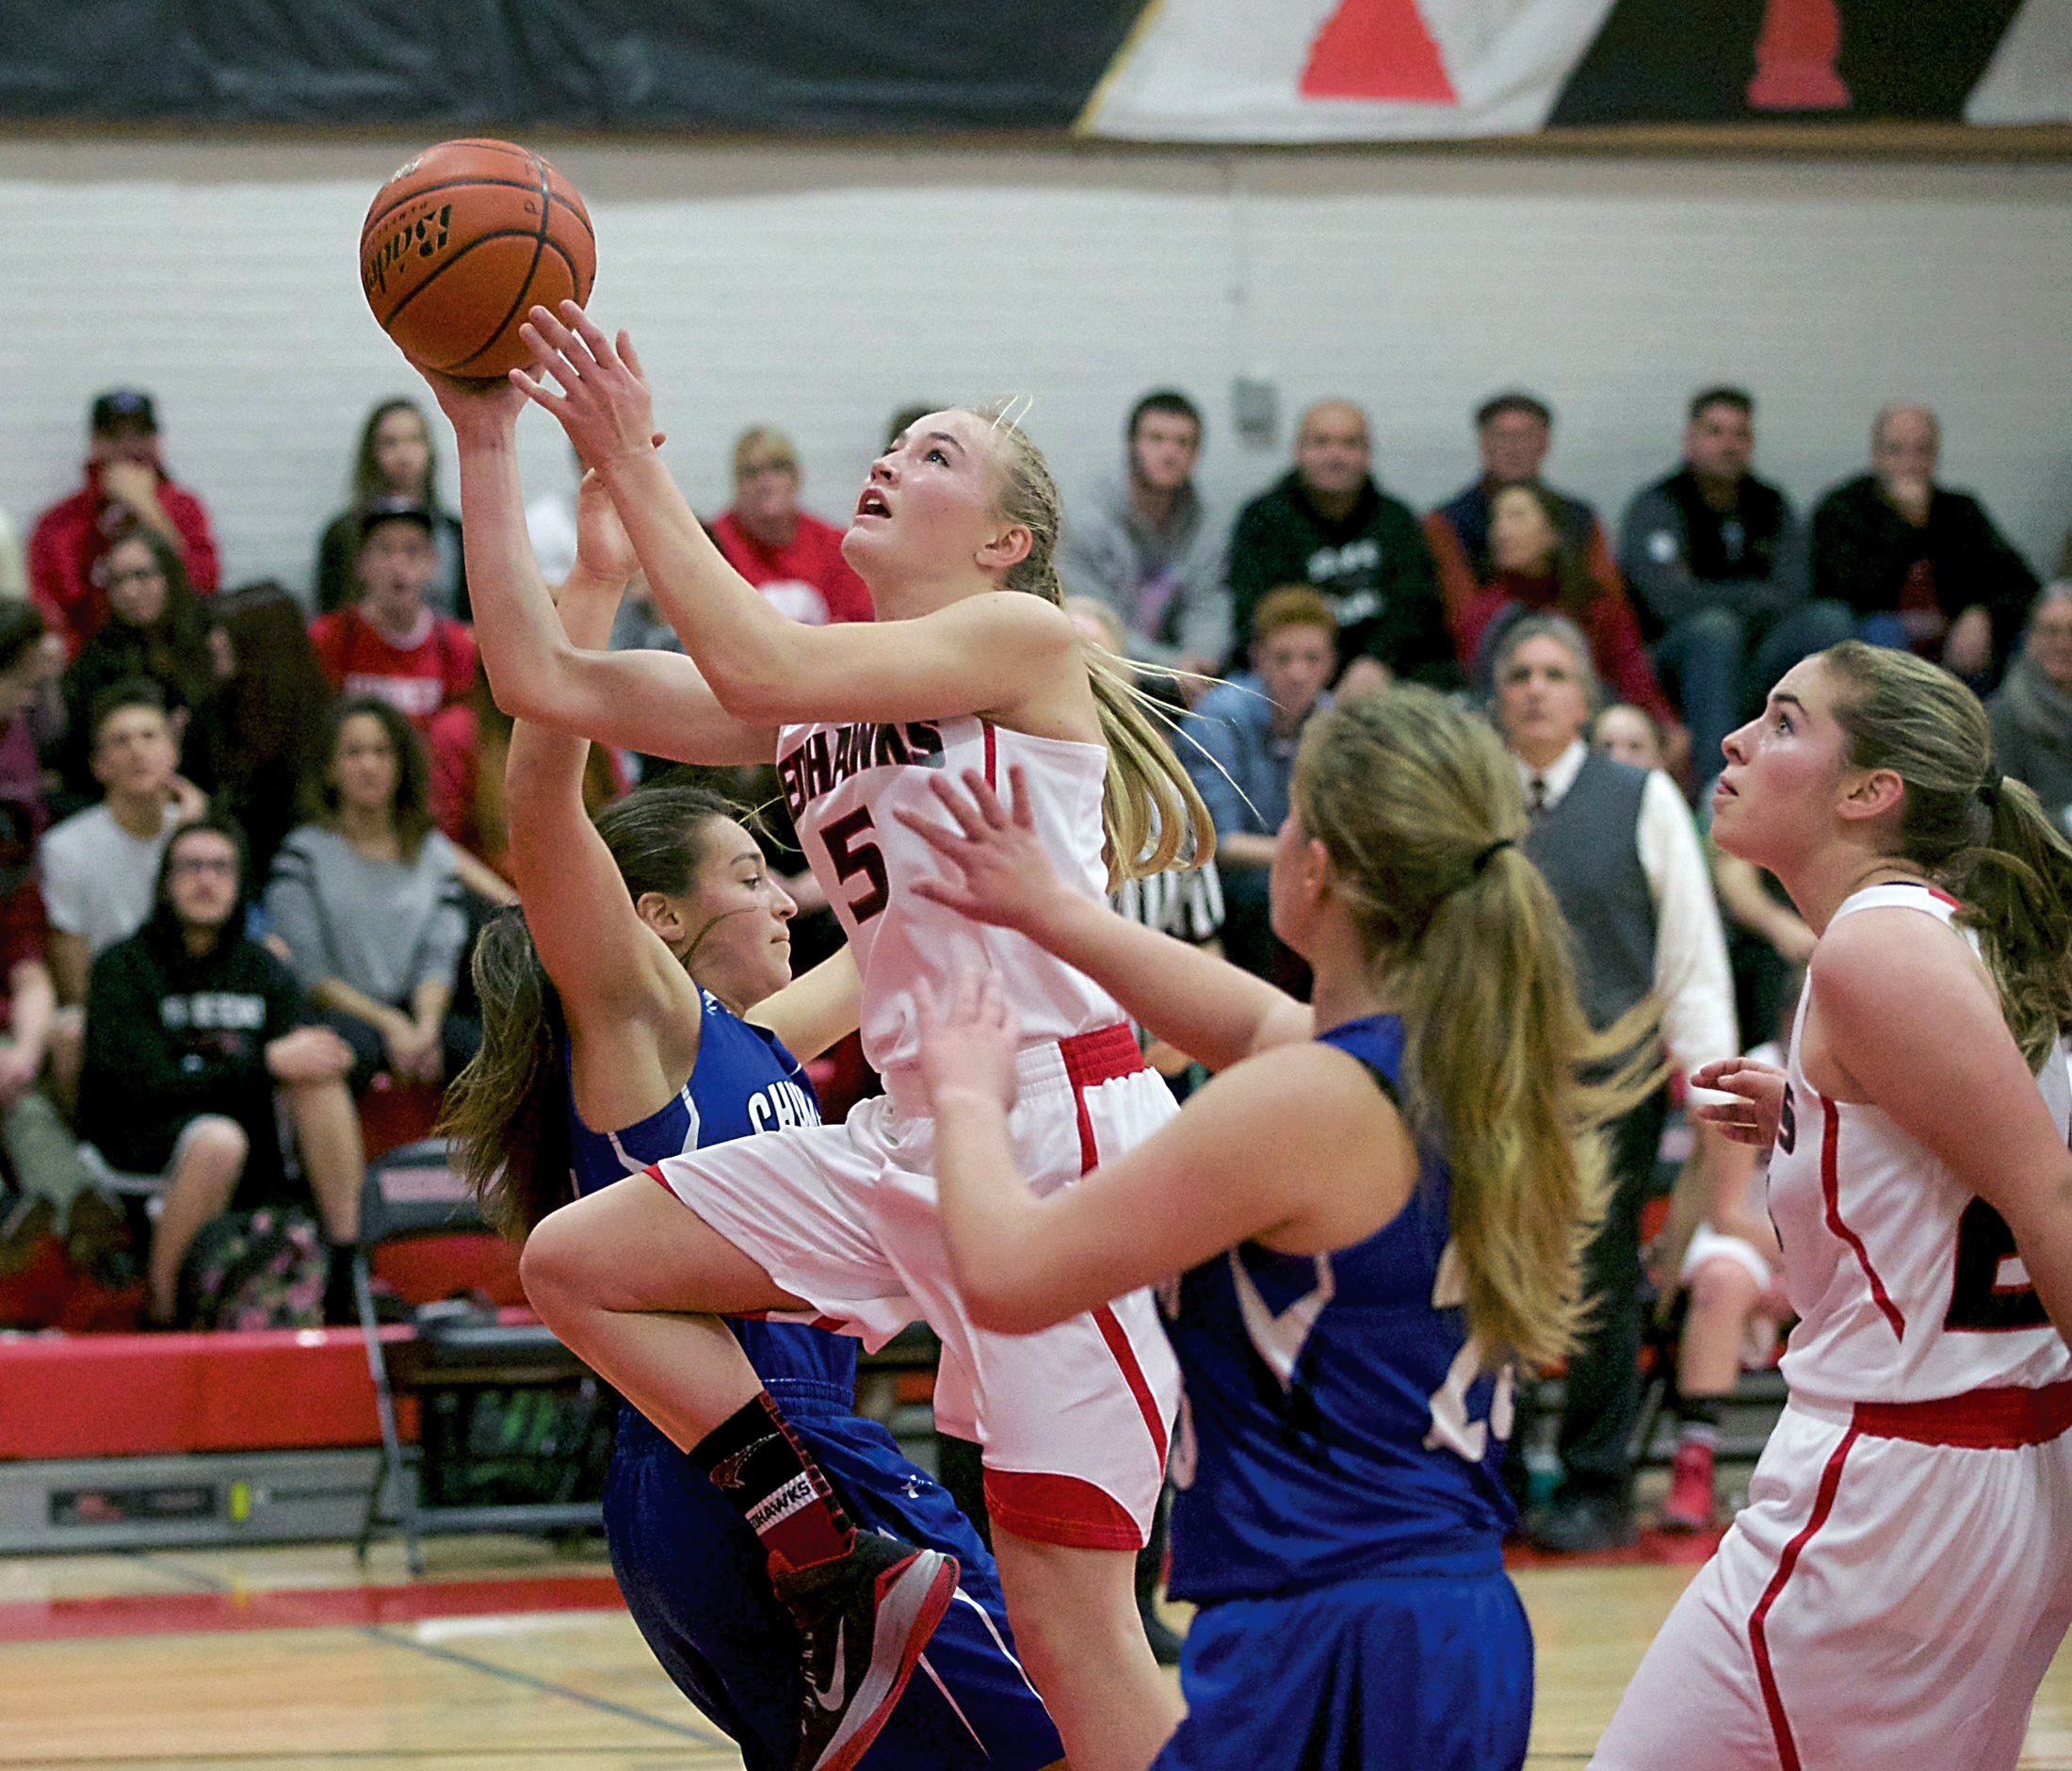 Port Townsend's Kaitlyn Meek goes up for a basket against Chimacum. Meek led all scorers with 21 points to lead the Redhawks to victory. Steve Mullensky/for Peninsula Daily News